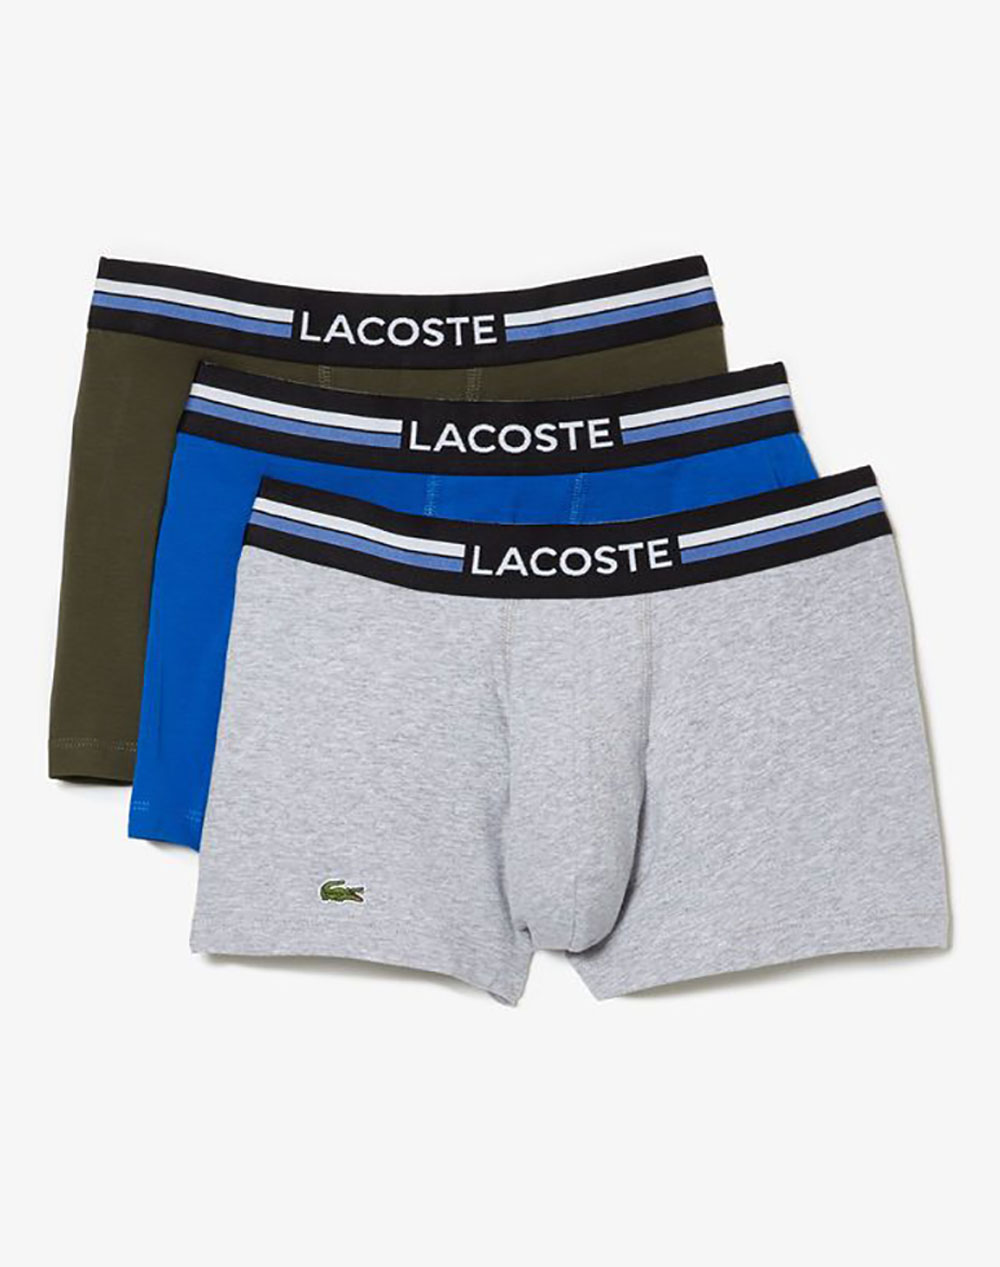 LACOSTE SET OF 3 TRUNKS - Mixed